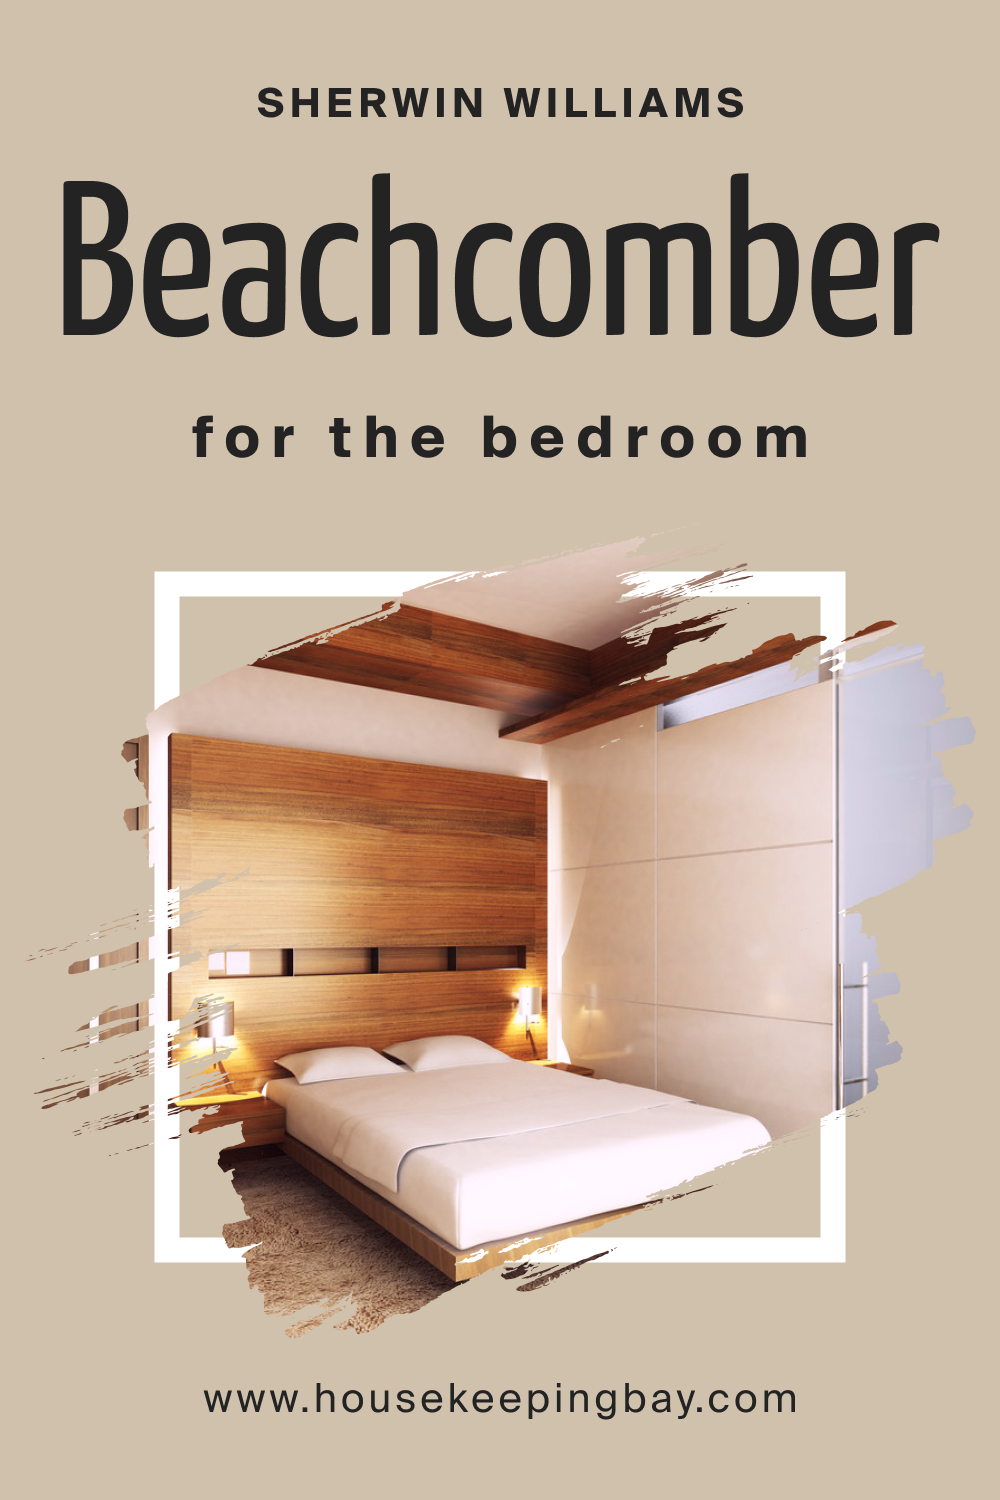 Sherwin Williams. SW 9617 Beachcomber For the bedroom